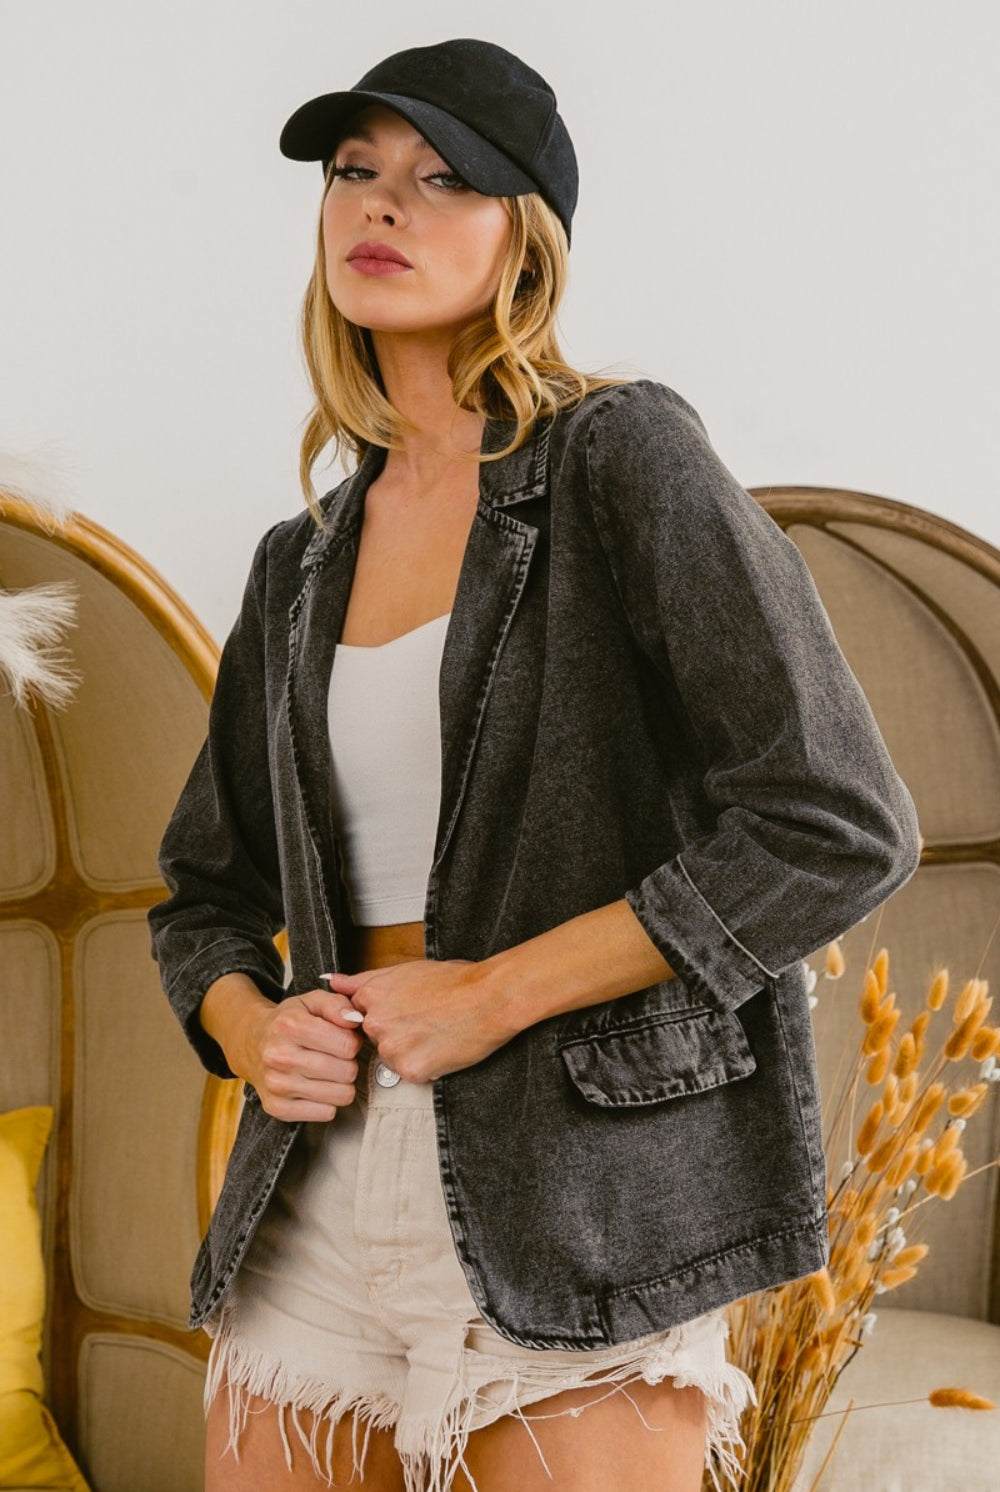 A woman wearing a chic denim blazer with a textured finish, styled with a simple white top, distressed cream shorts, and accessorized with a black cap for a smart-casual look.